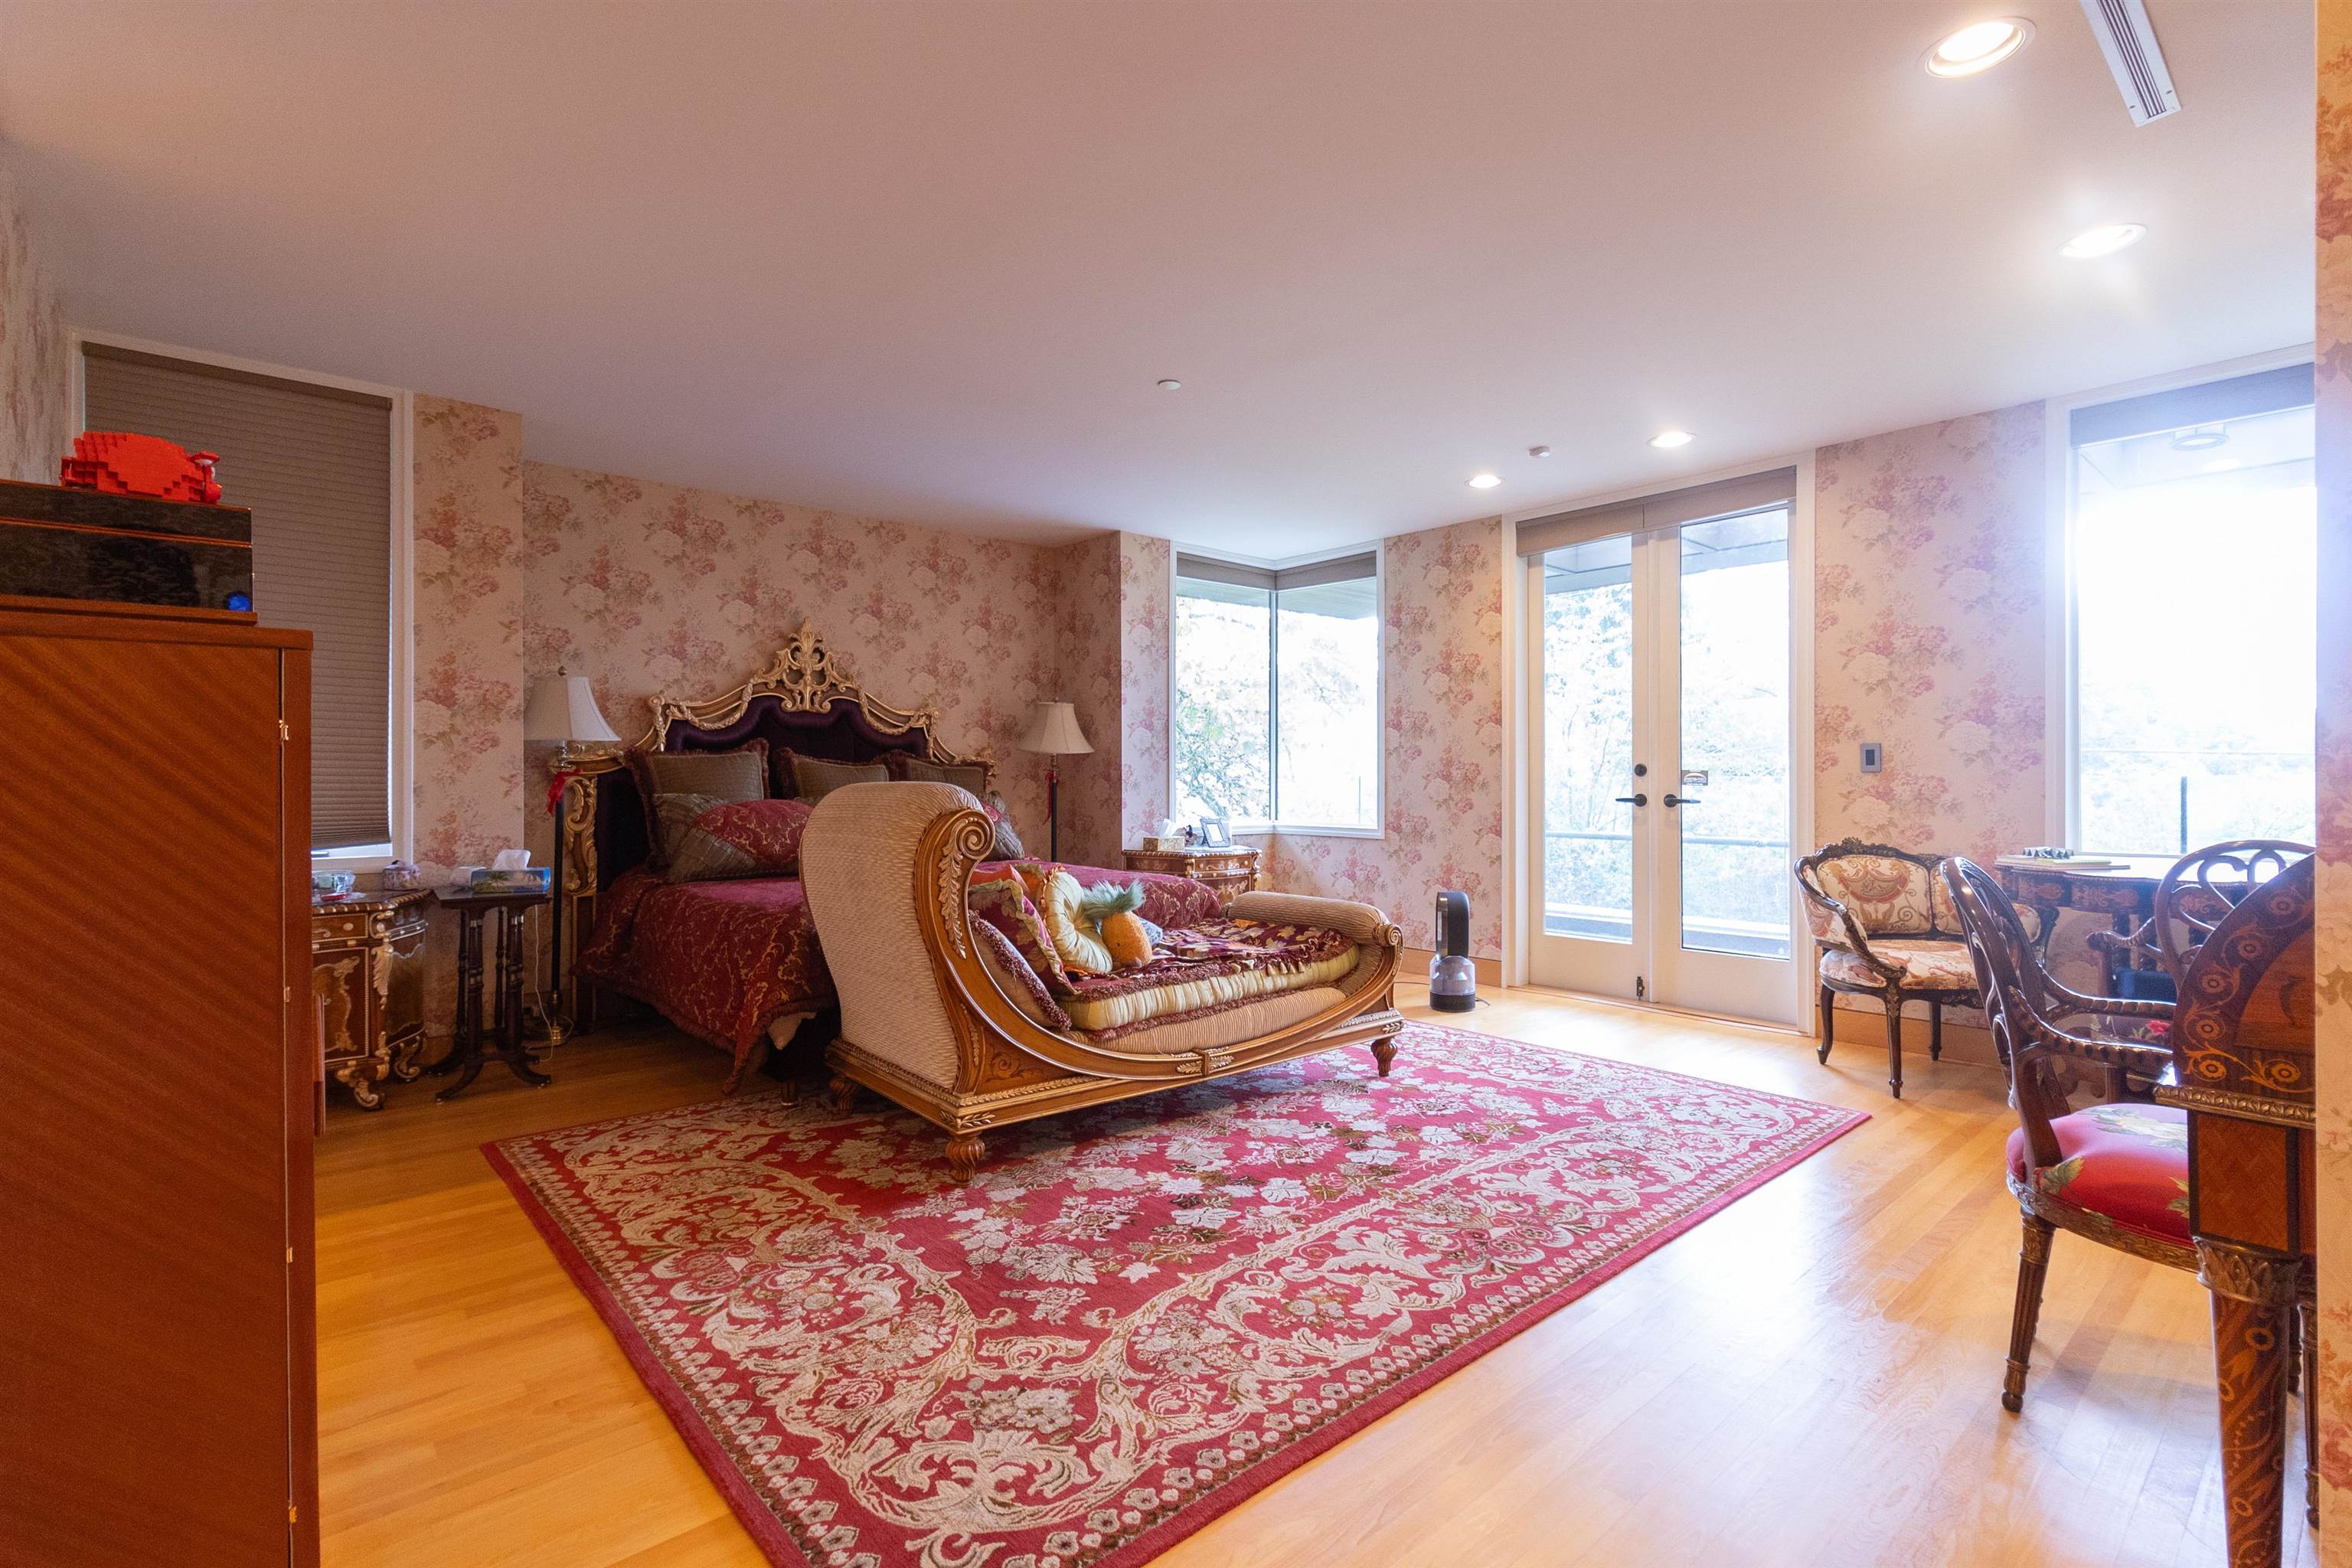 Listing image of 1178 LAURIER AVENUE